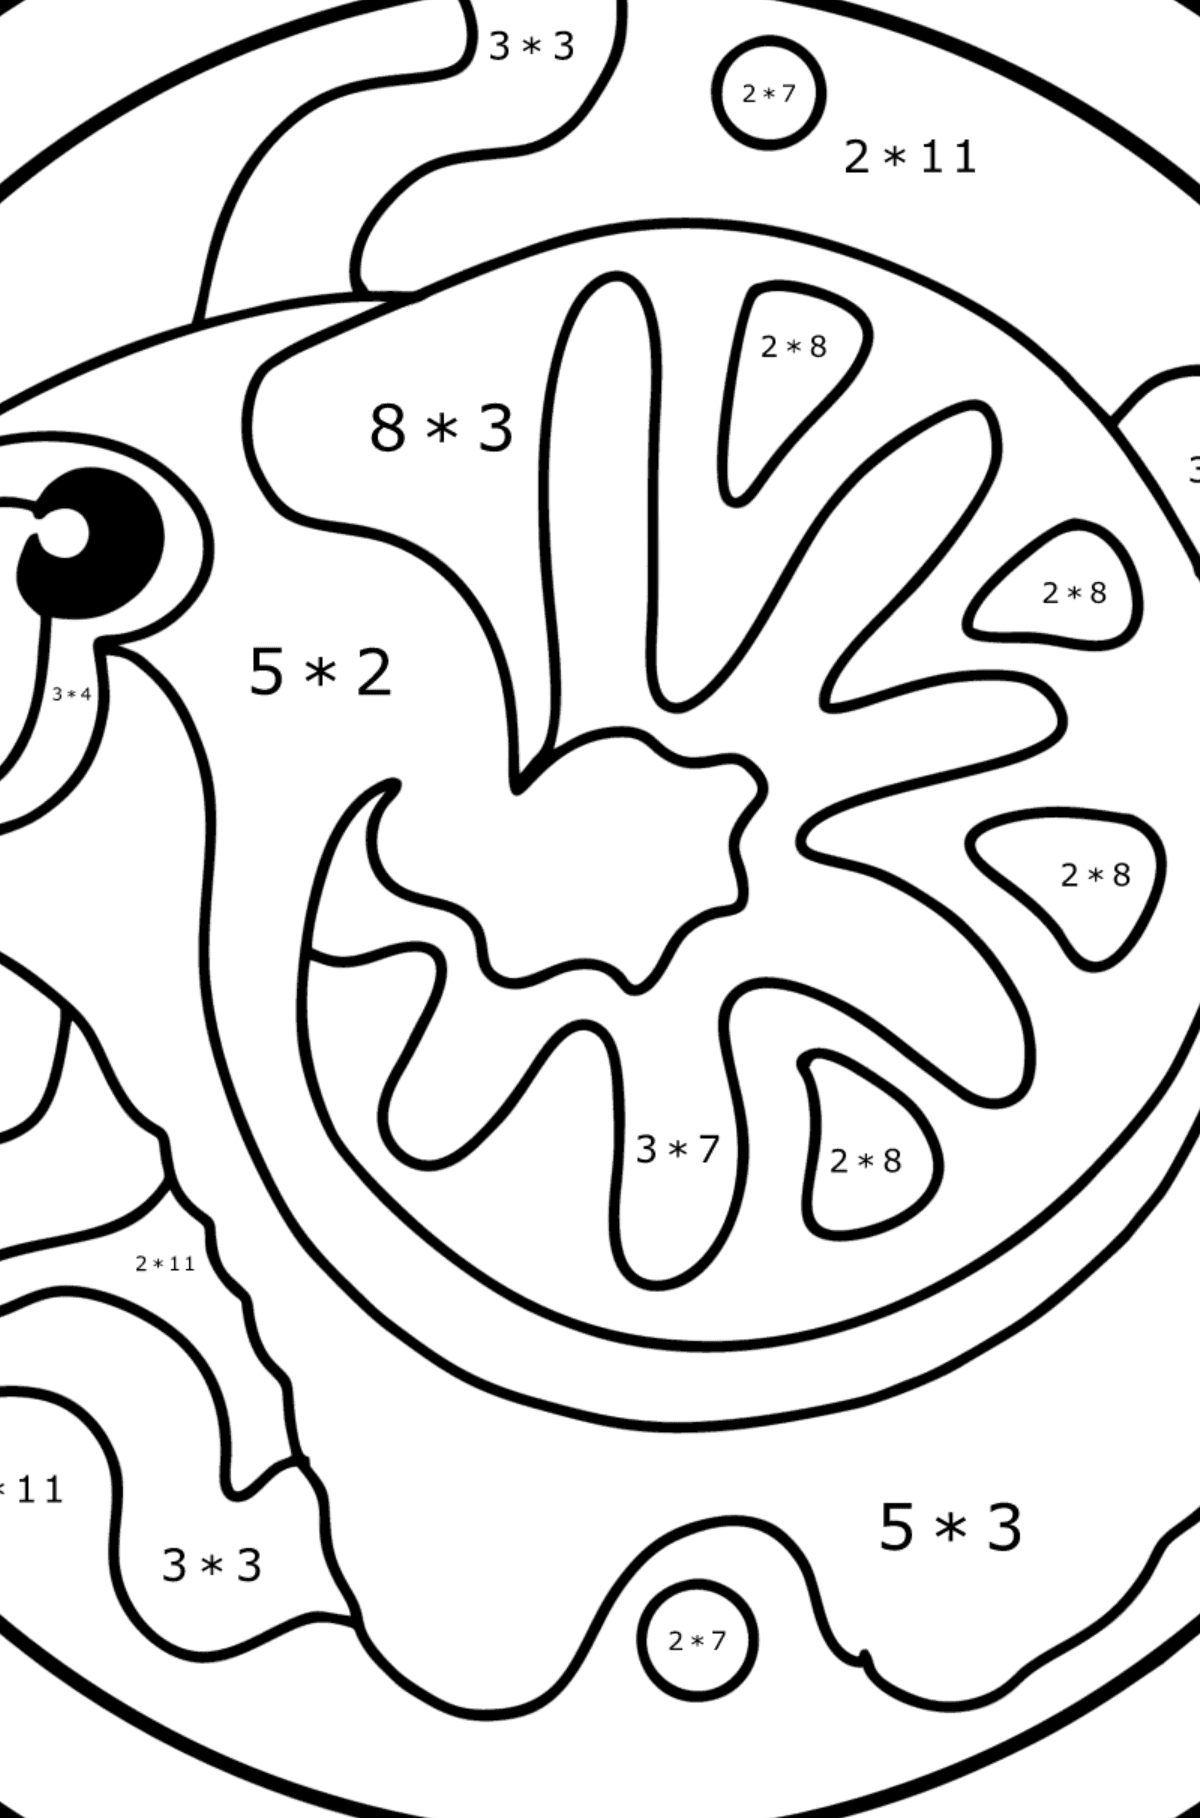 Coloring page for kids - zodiac sign Aries - Math Coloring - Multiplication for Kids